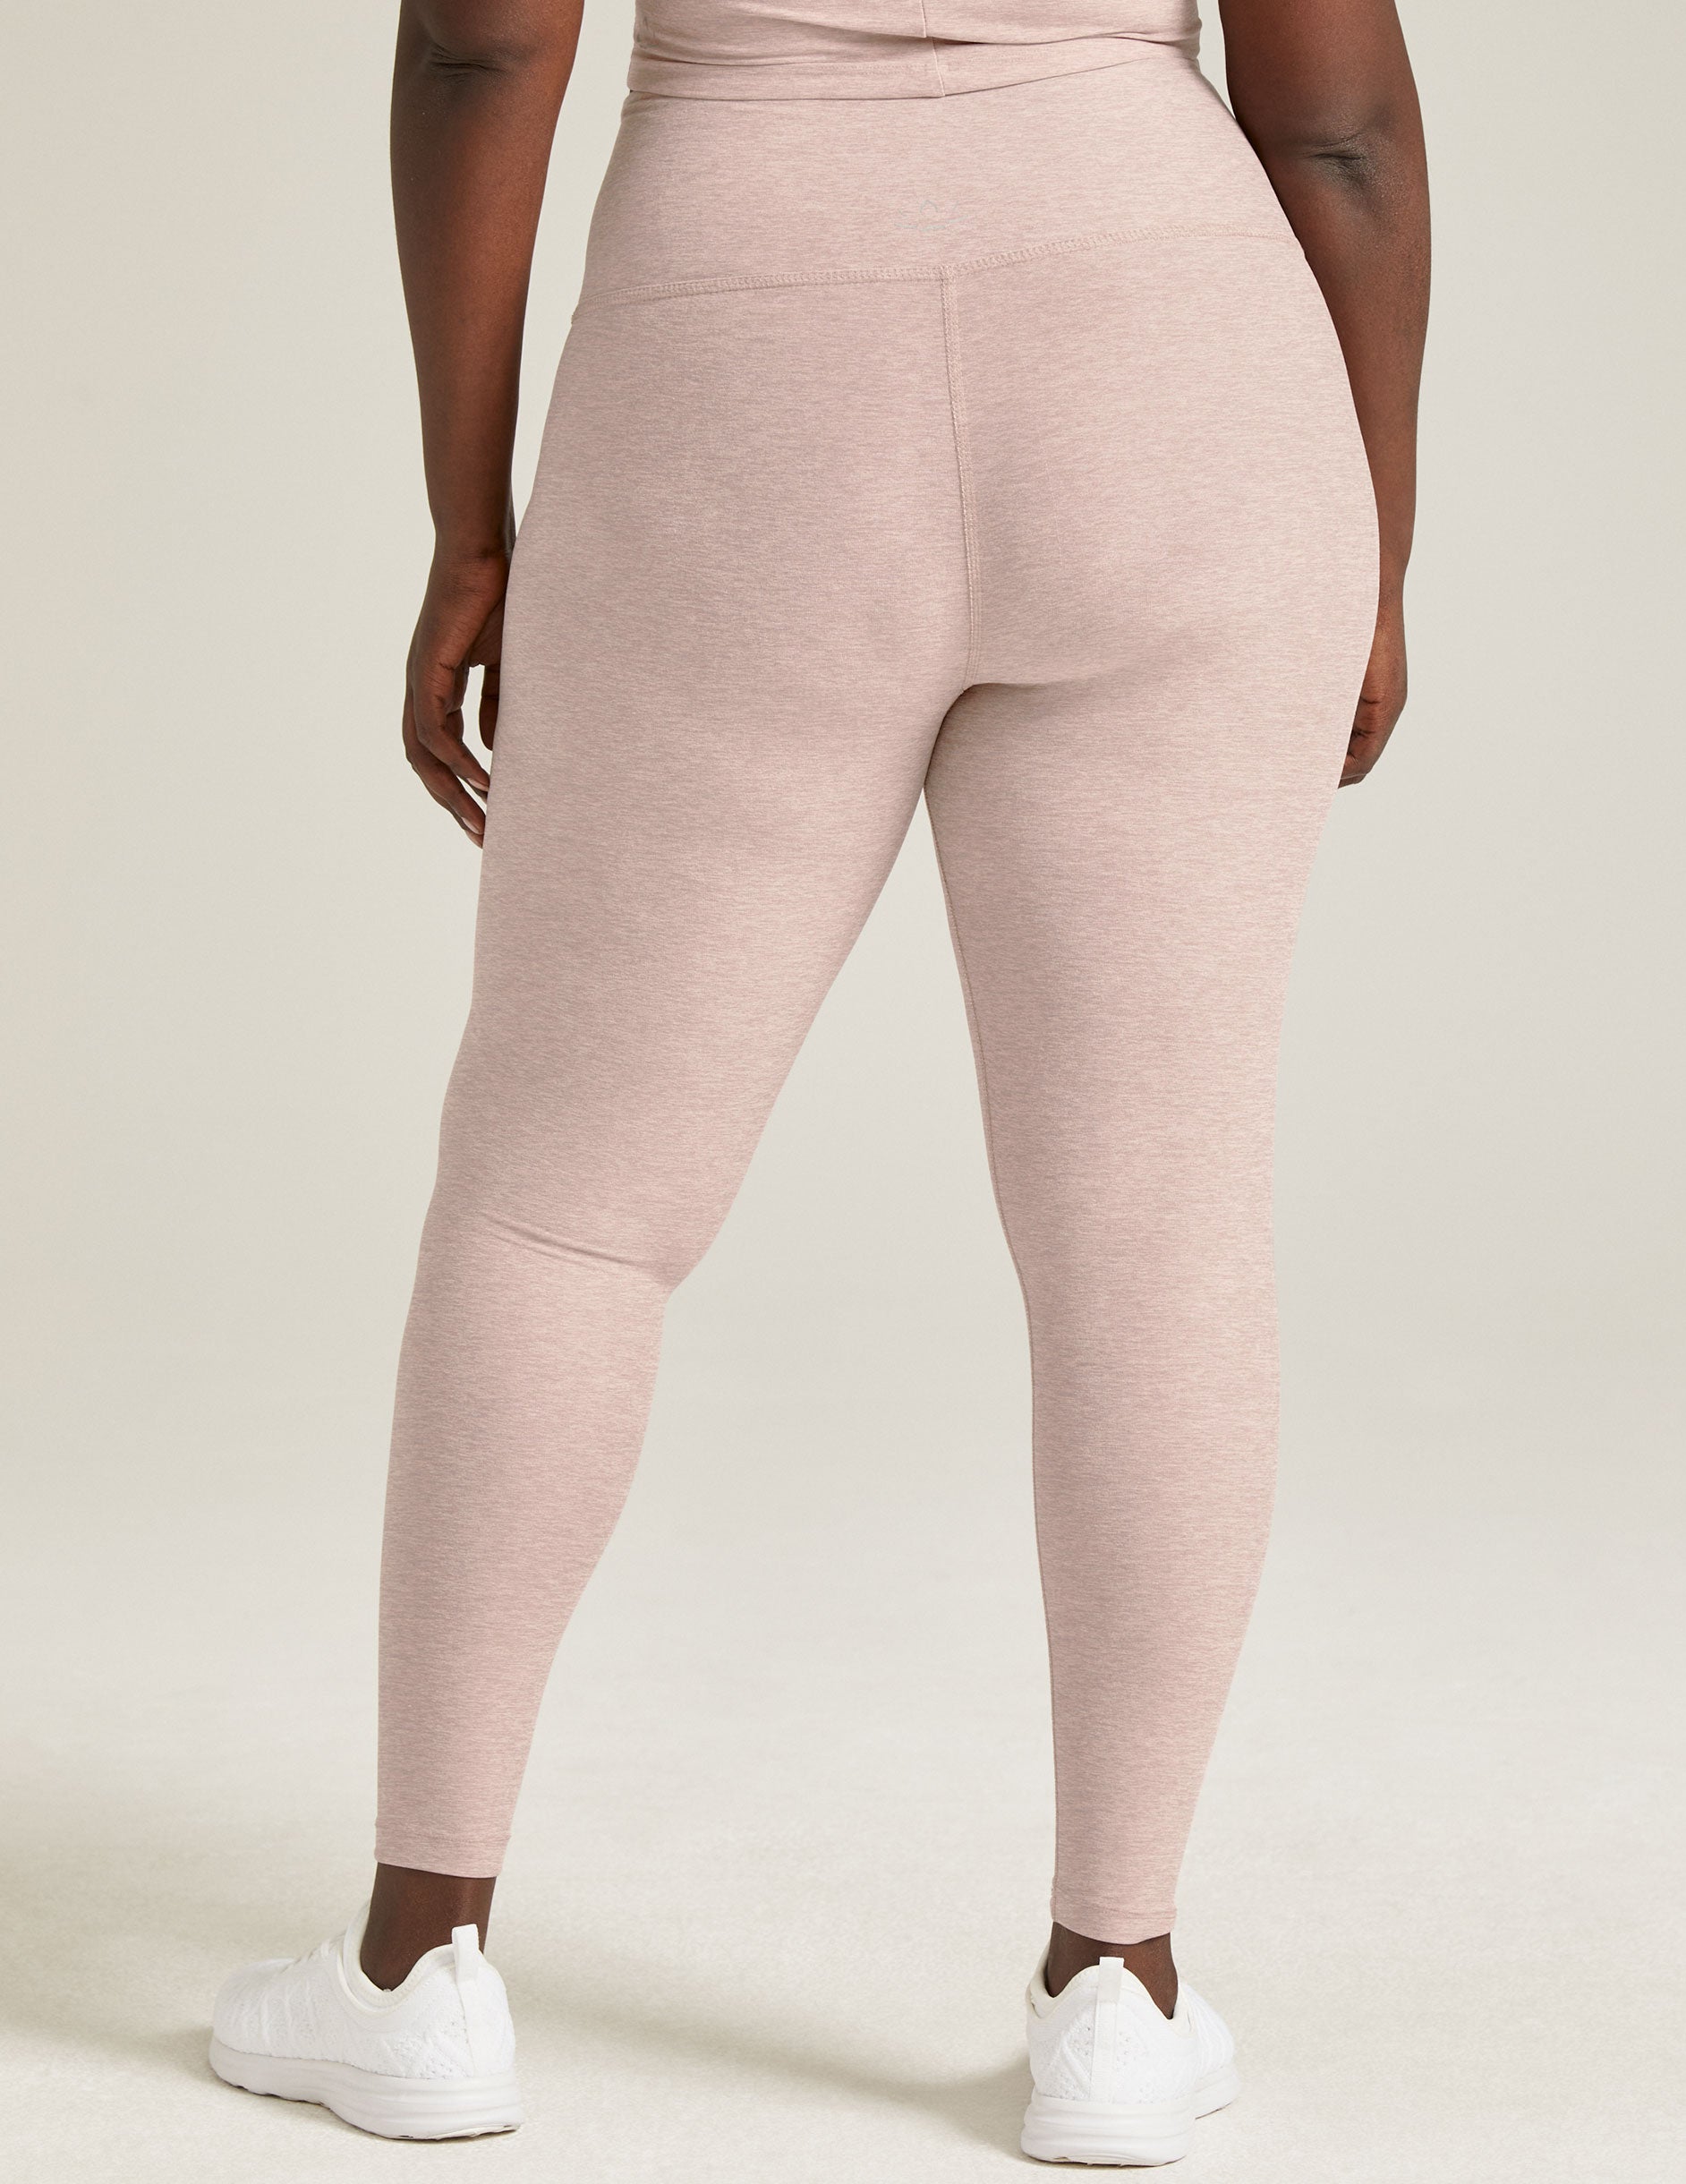 Beyond Yoga Lux High Waisted Midi Leggings in Stellar Blue Cloud Size XL -  $55 (30% Off Retail) New With Tags - From Callie